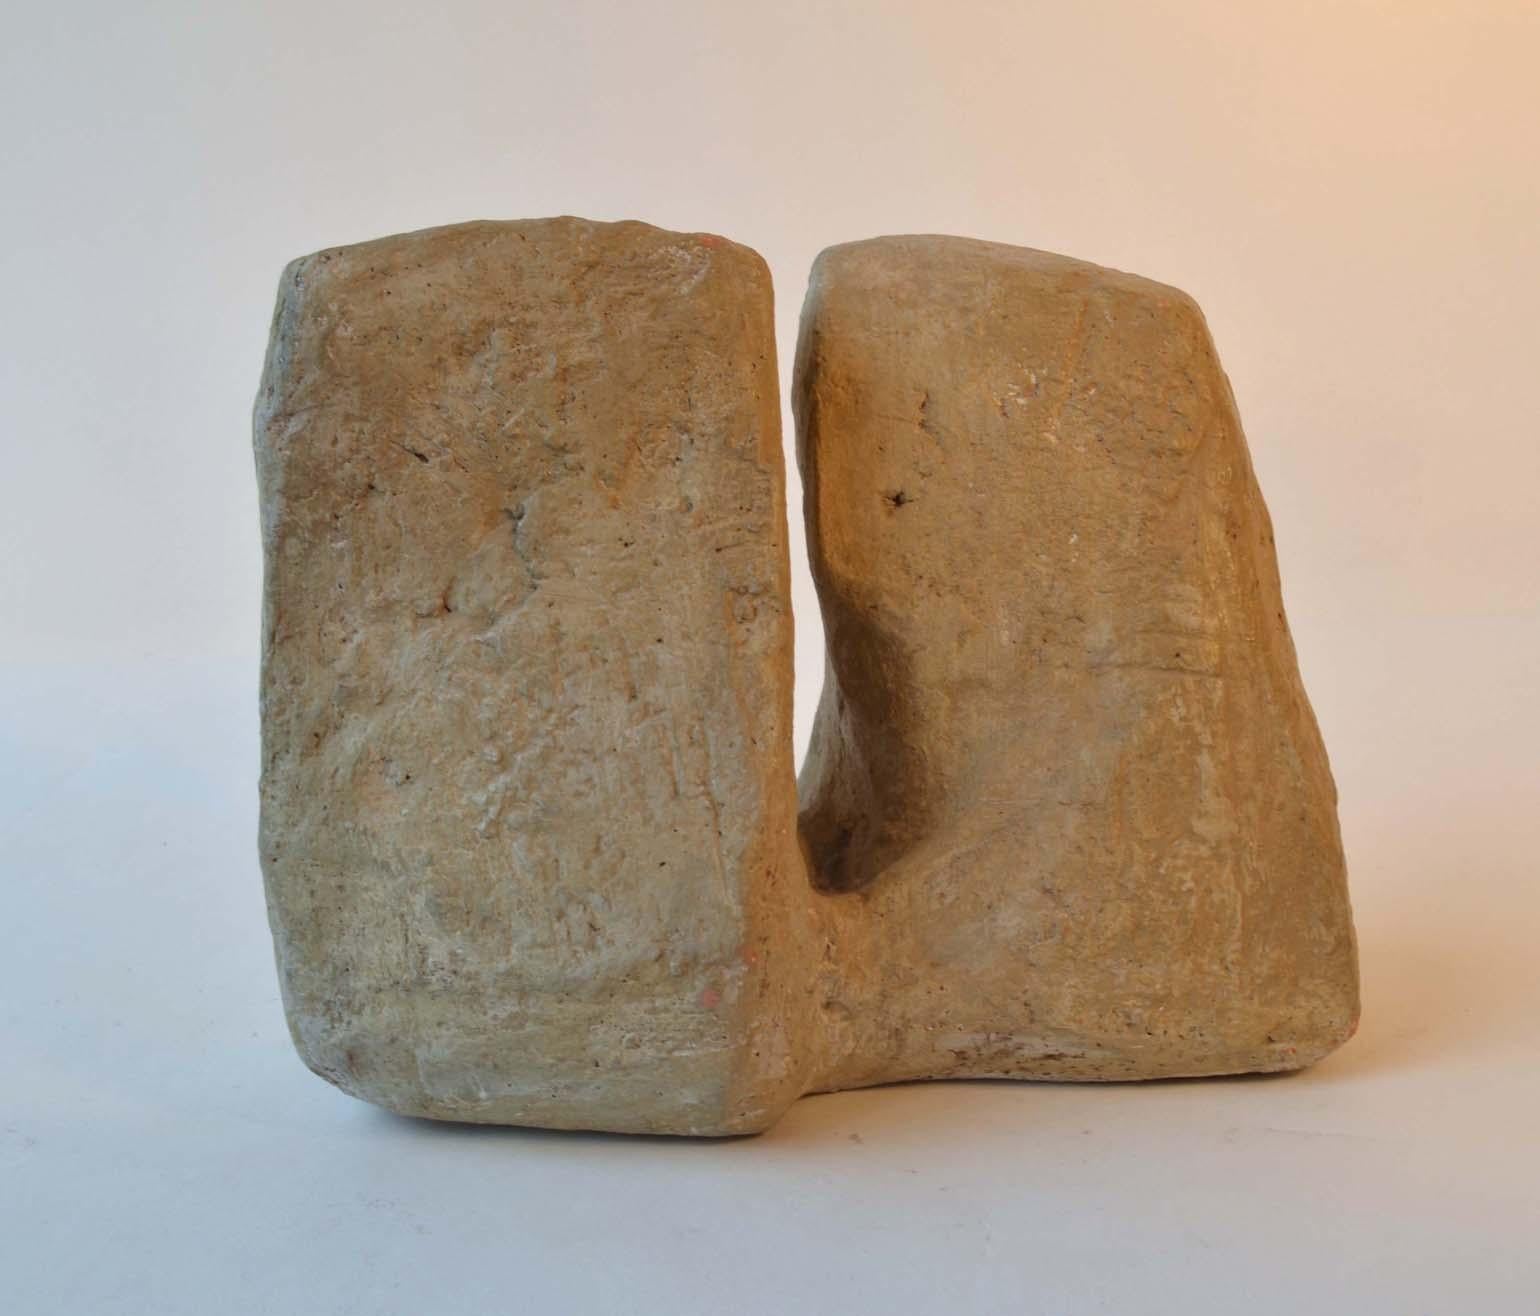 This hand formed ceramic sculpture resemble rocks in sand stone colour. They are hand-sculpted ceramic nd coloured.
Blow's work echoes a voyage of discovery in not just the visible natural world of trees, rocks but the city and Industrial landscape